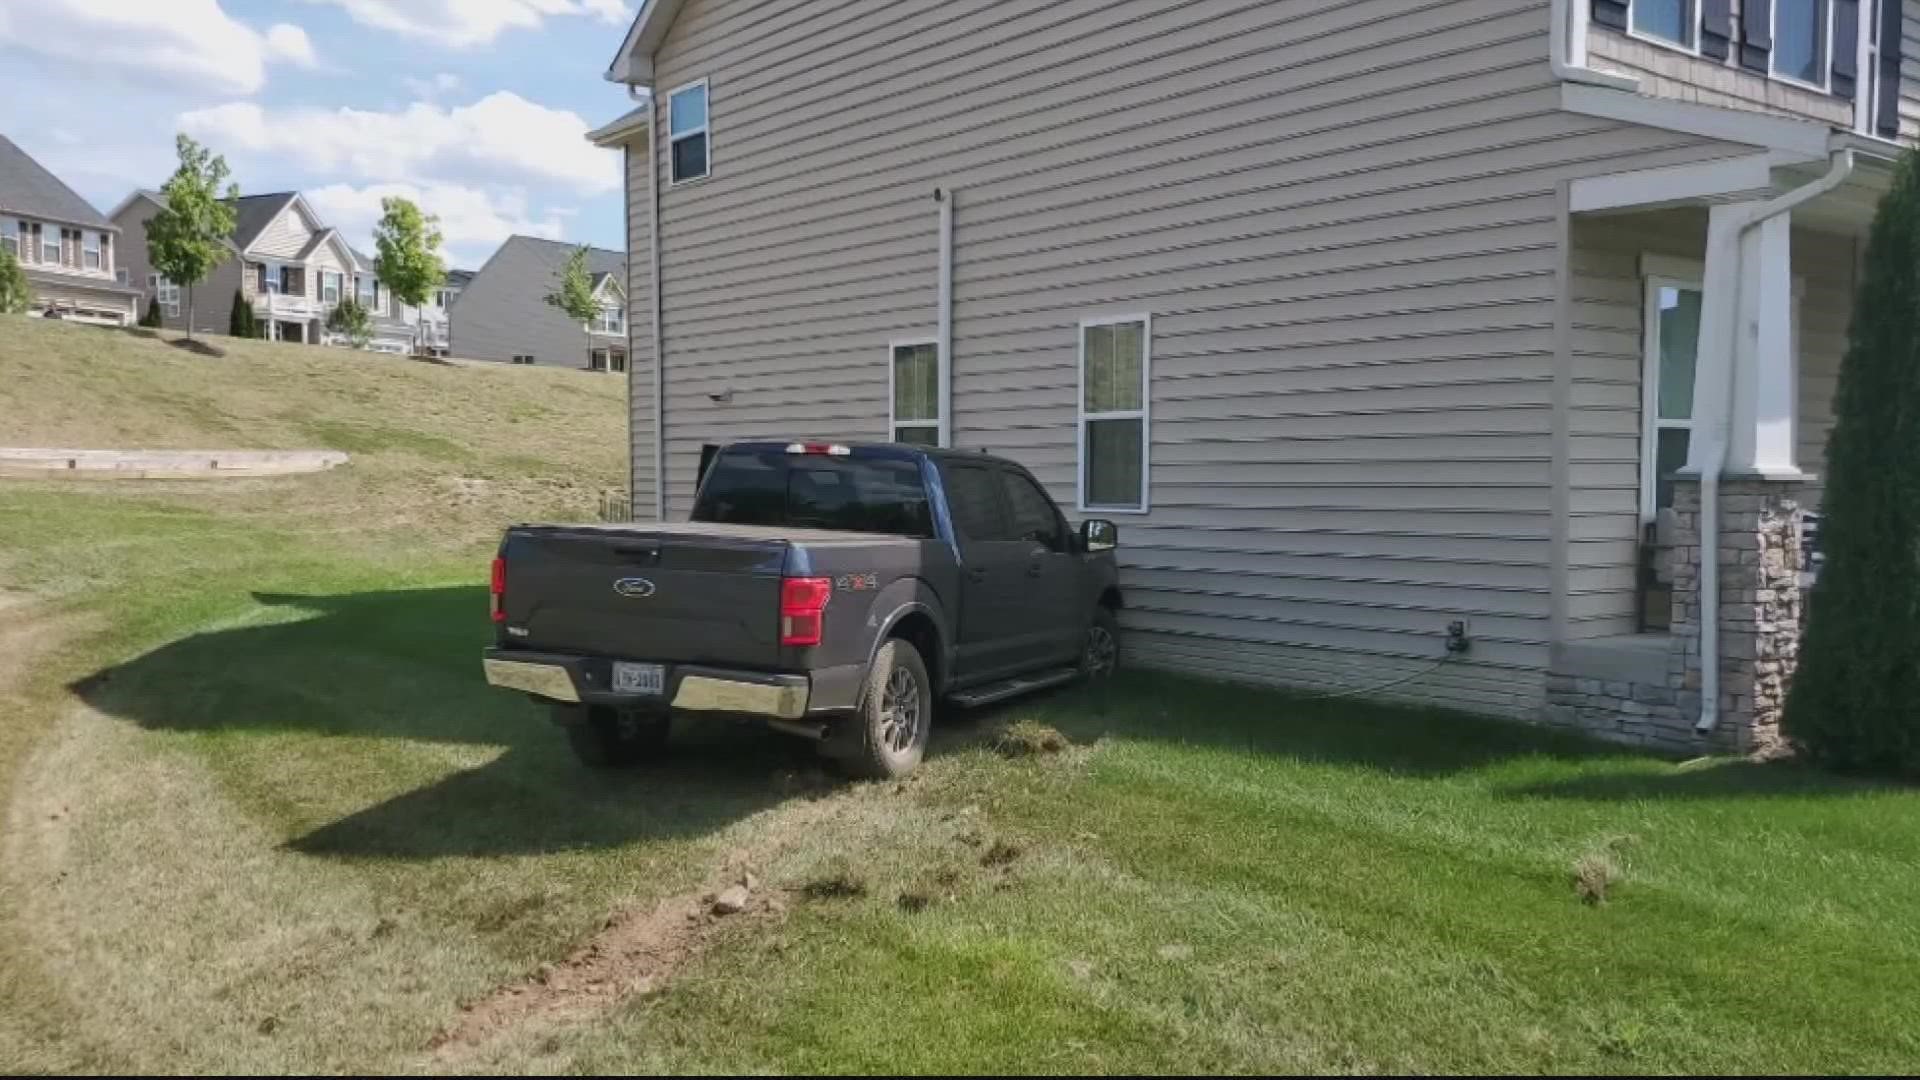 Police say the principal was driving drunk - hit the house with his truck - then fled the scene.